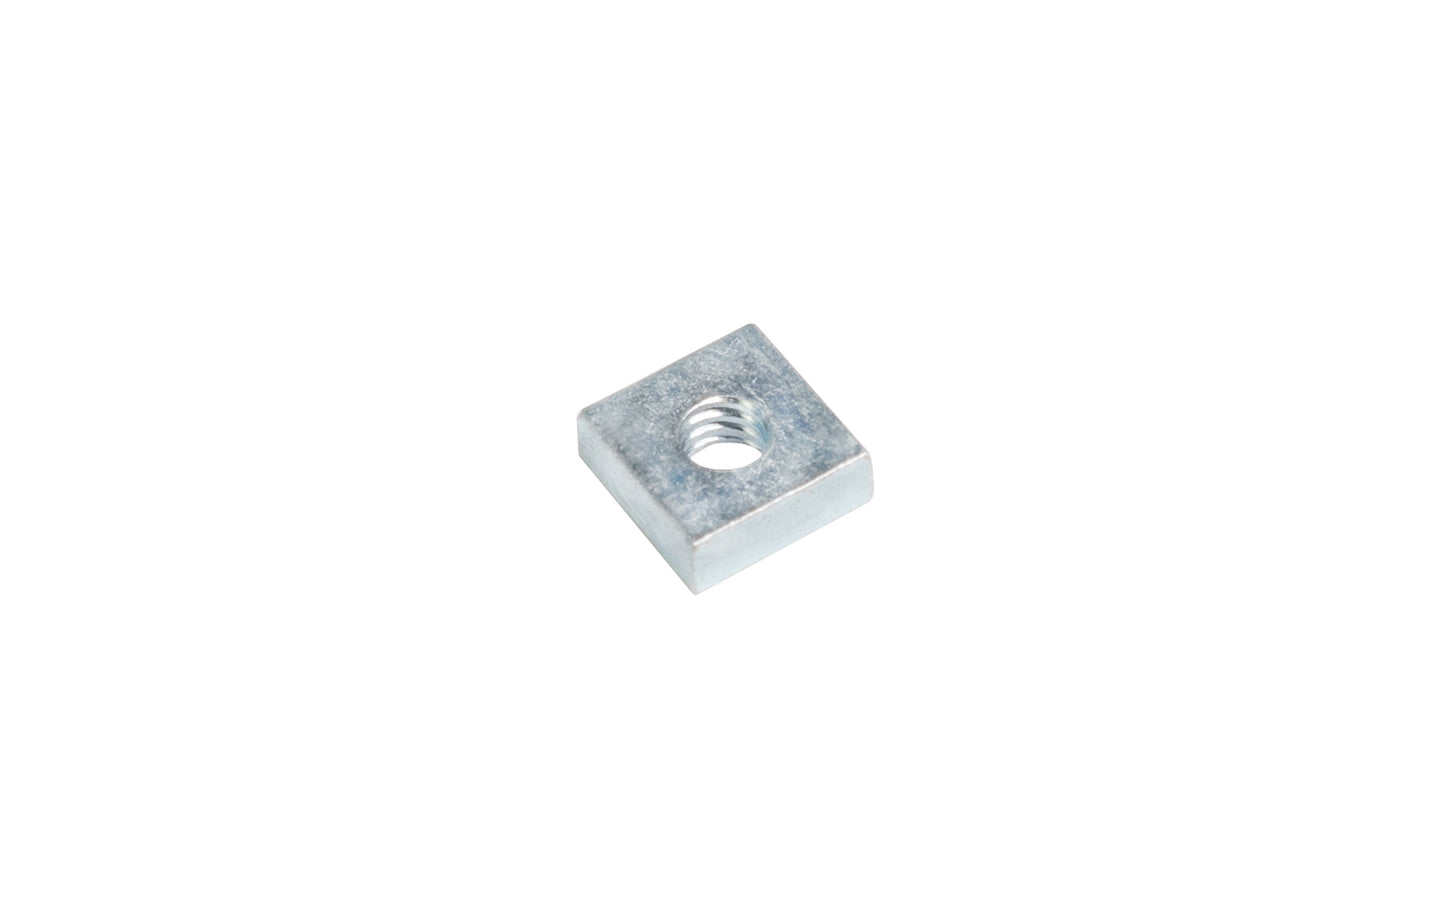 6-32 Square Nut - Zinc-plated steel